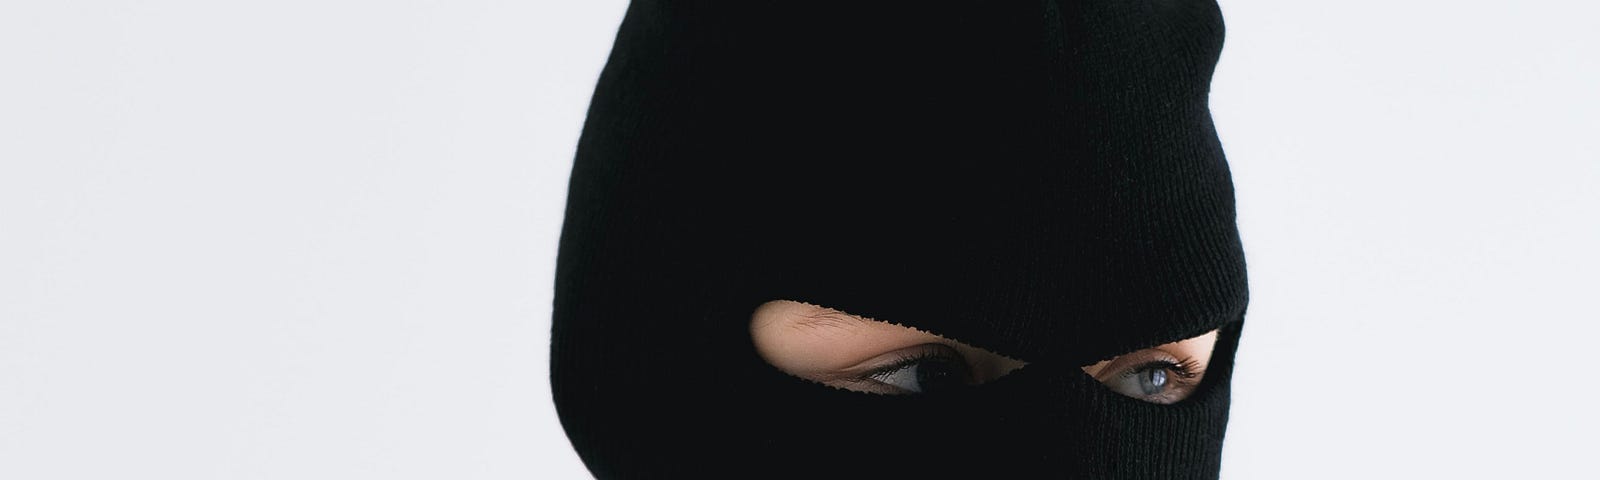 Close-up Shot of a Person Wearing a Robber Mask